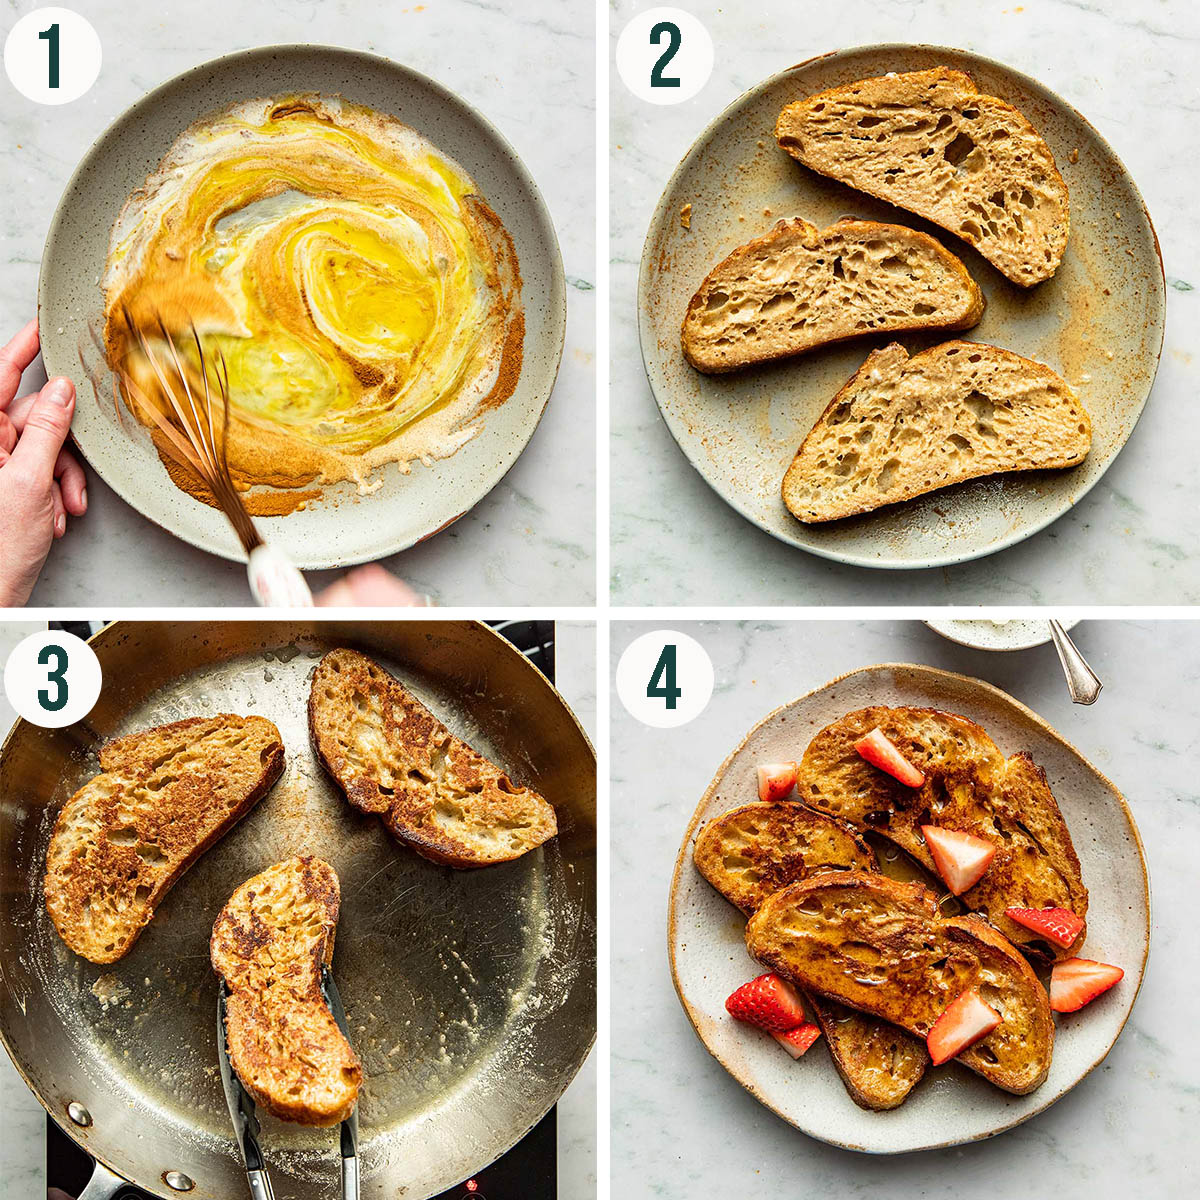 French toast steps 1 to 4, mixing custard, before and after cooking, topped with syrup.